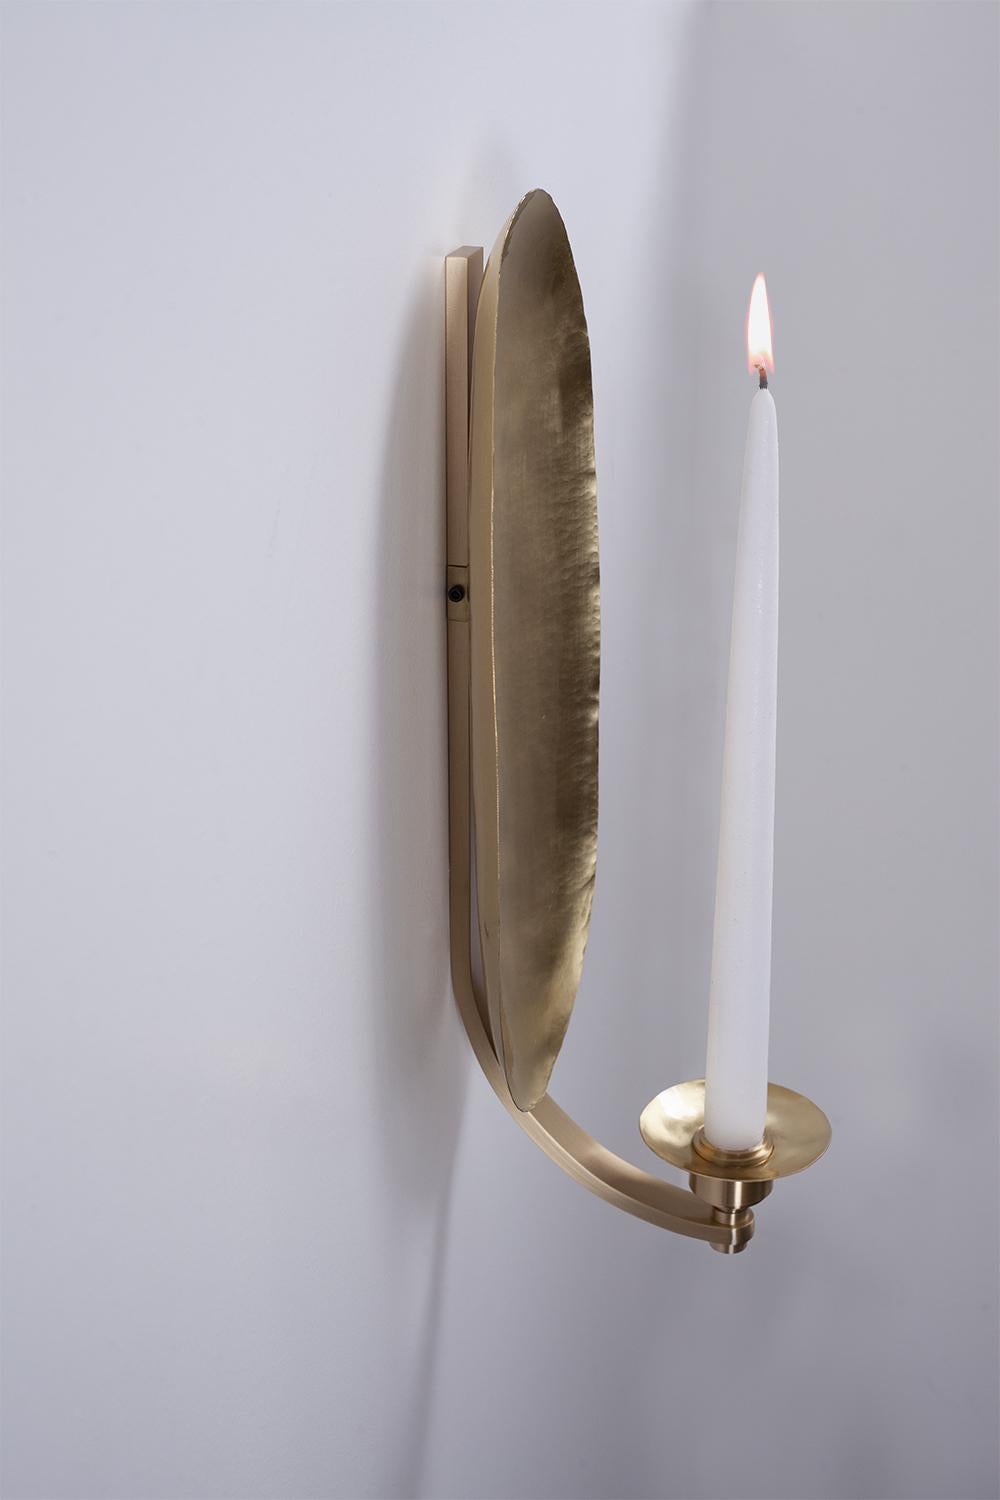 To light up, the Egyptians used silver mirrors that reflected light. This principle is reinterpreted here on a wall lamp with clean, curved shapes.

This sconce bears the name “Martincourt” in memory of this bronzier, sculptor and modeler